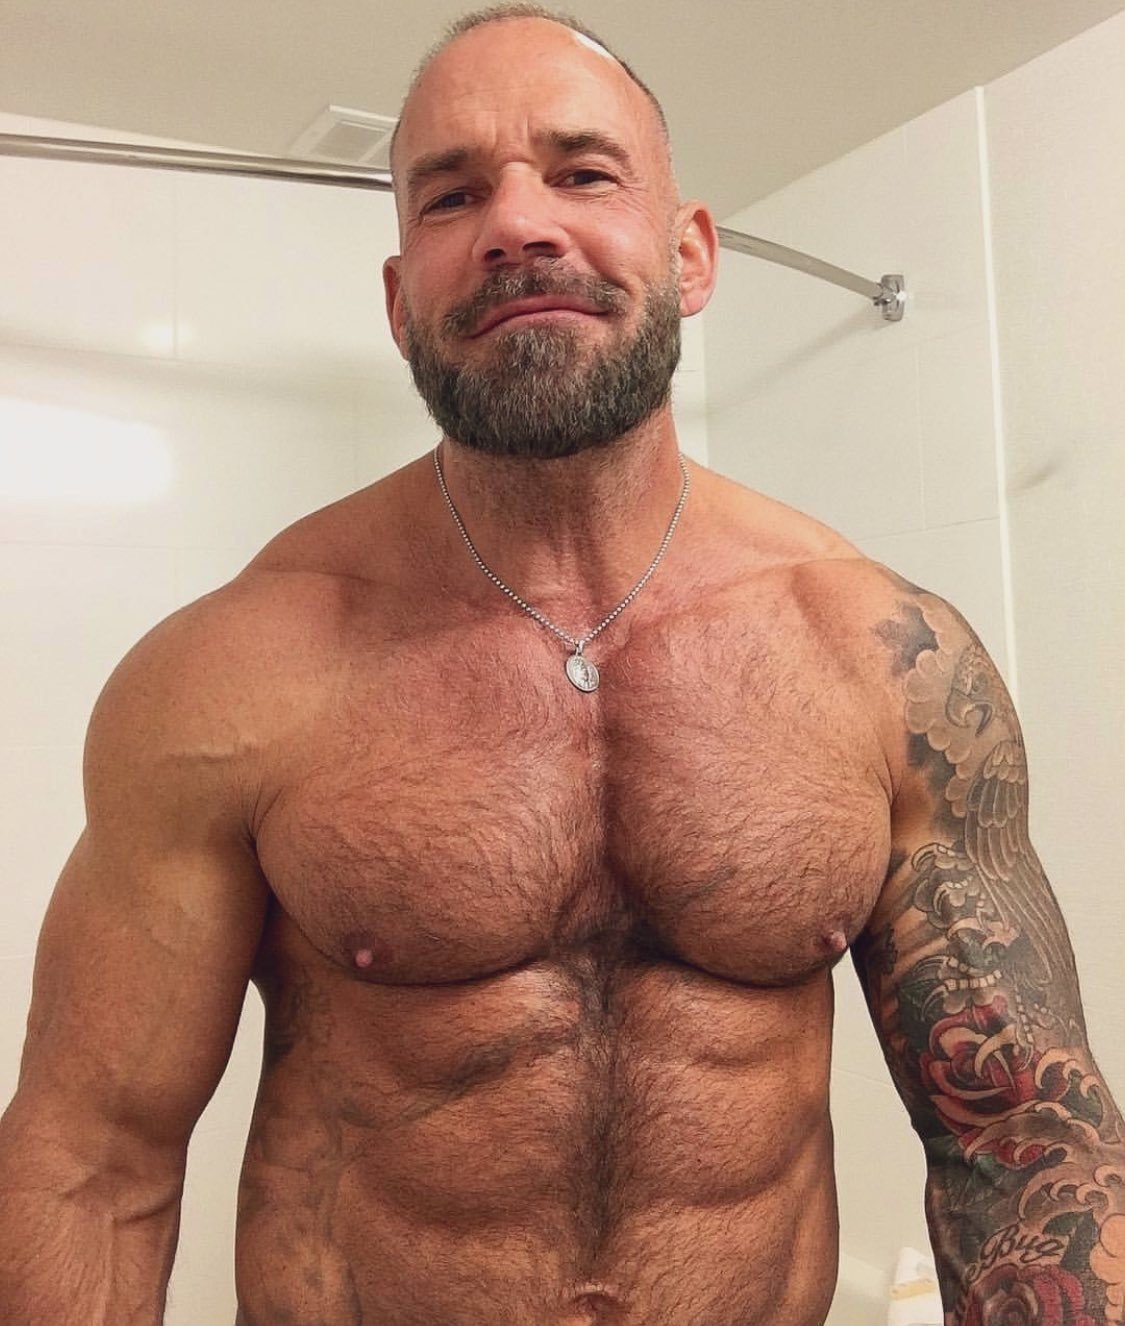 Photo by Smitty with the username @Resol702, posted on April 25, 2019. The post is about the topic Gay DILF